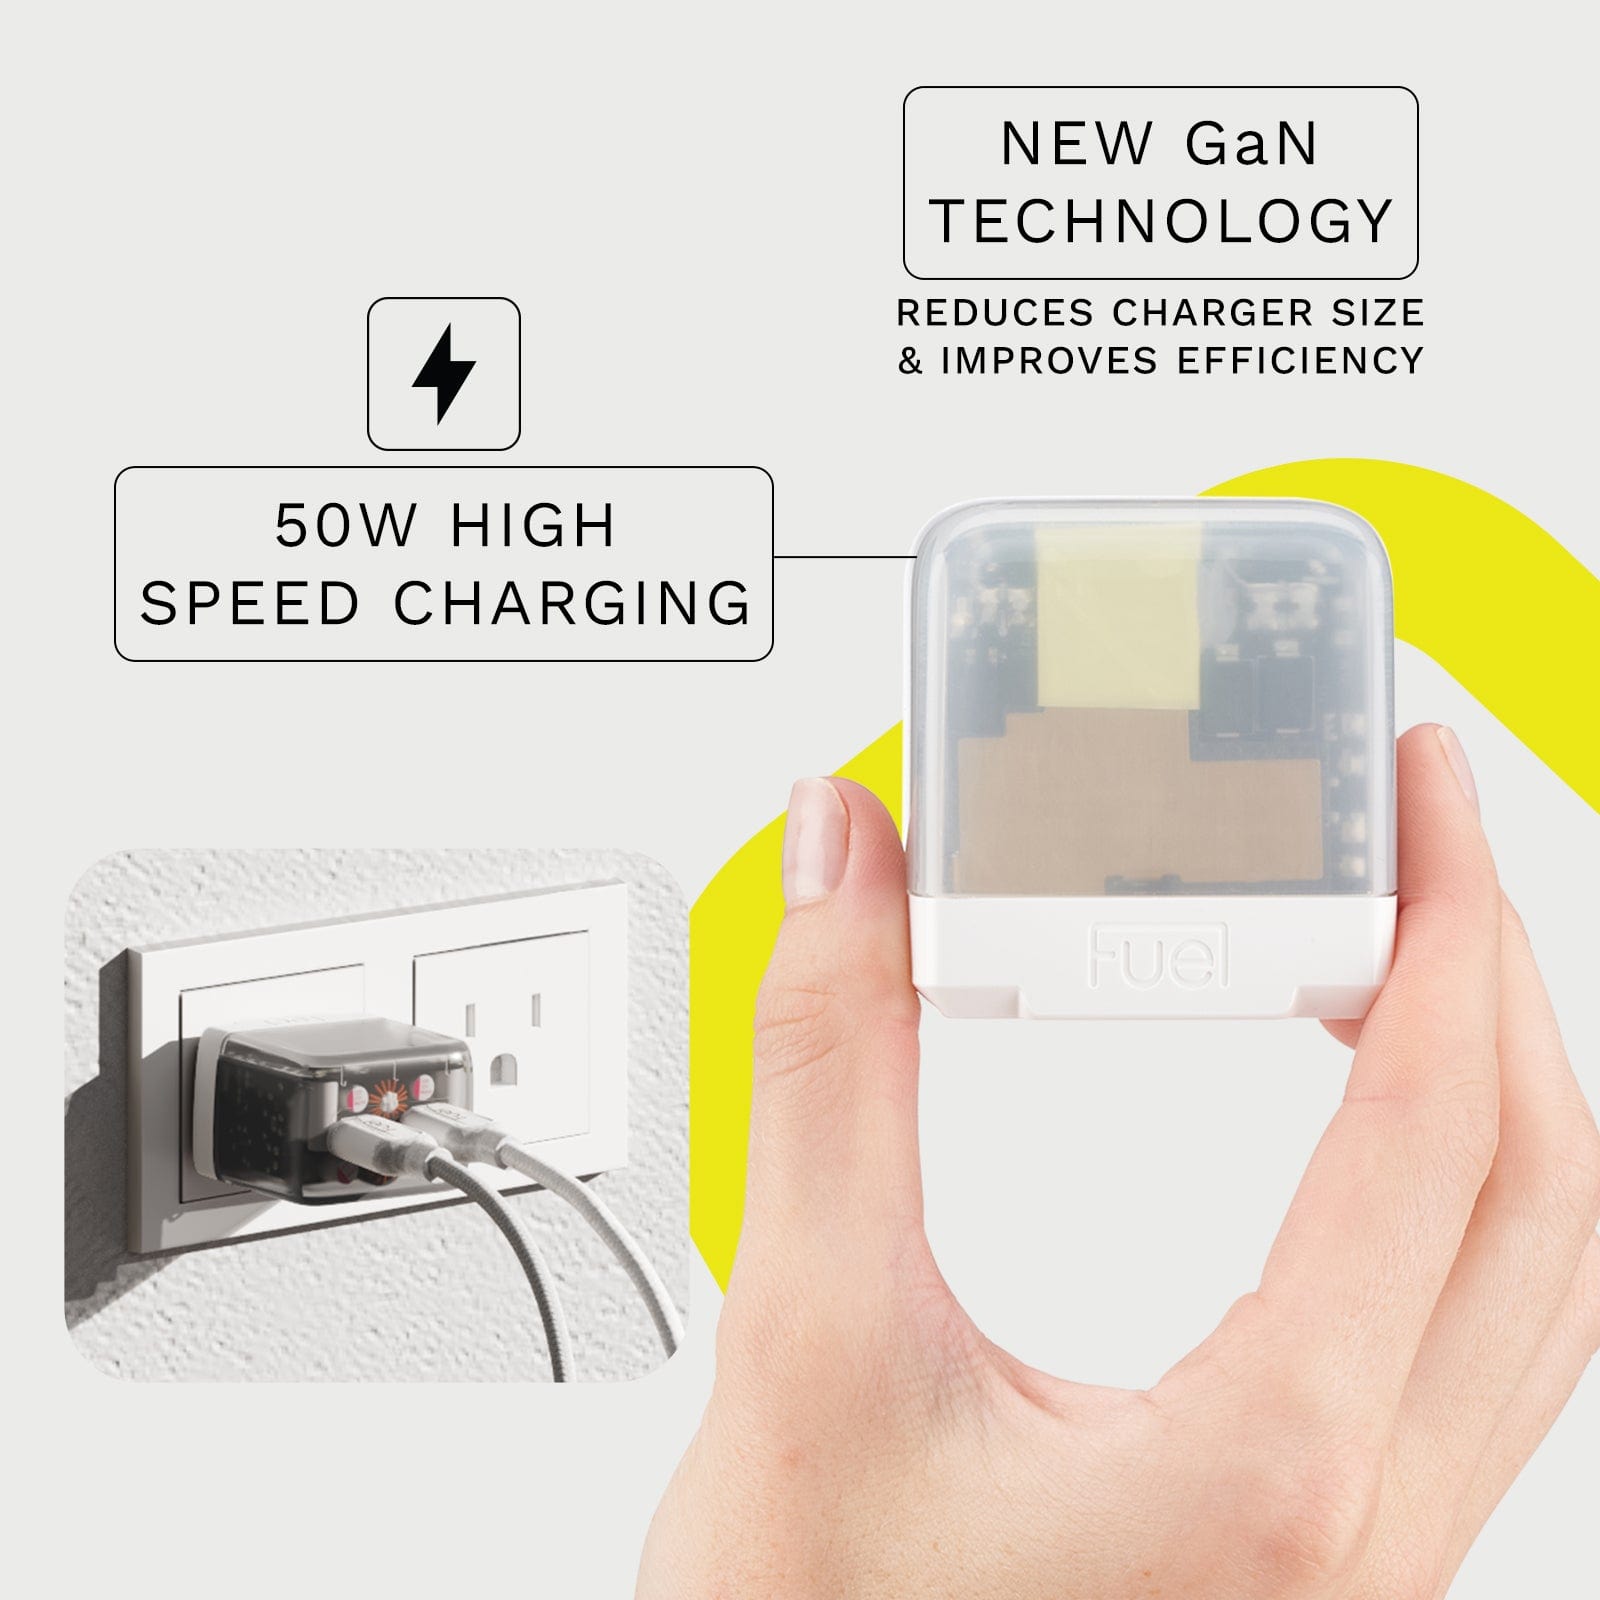 50w high speed charging. Wireless fast charging up to 10w. New gan technology. reduced charger size & improves efficiency.